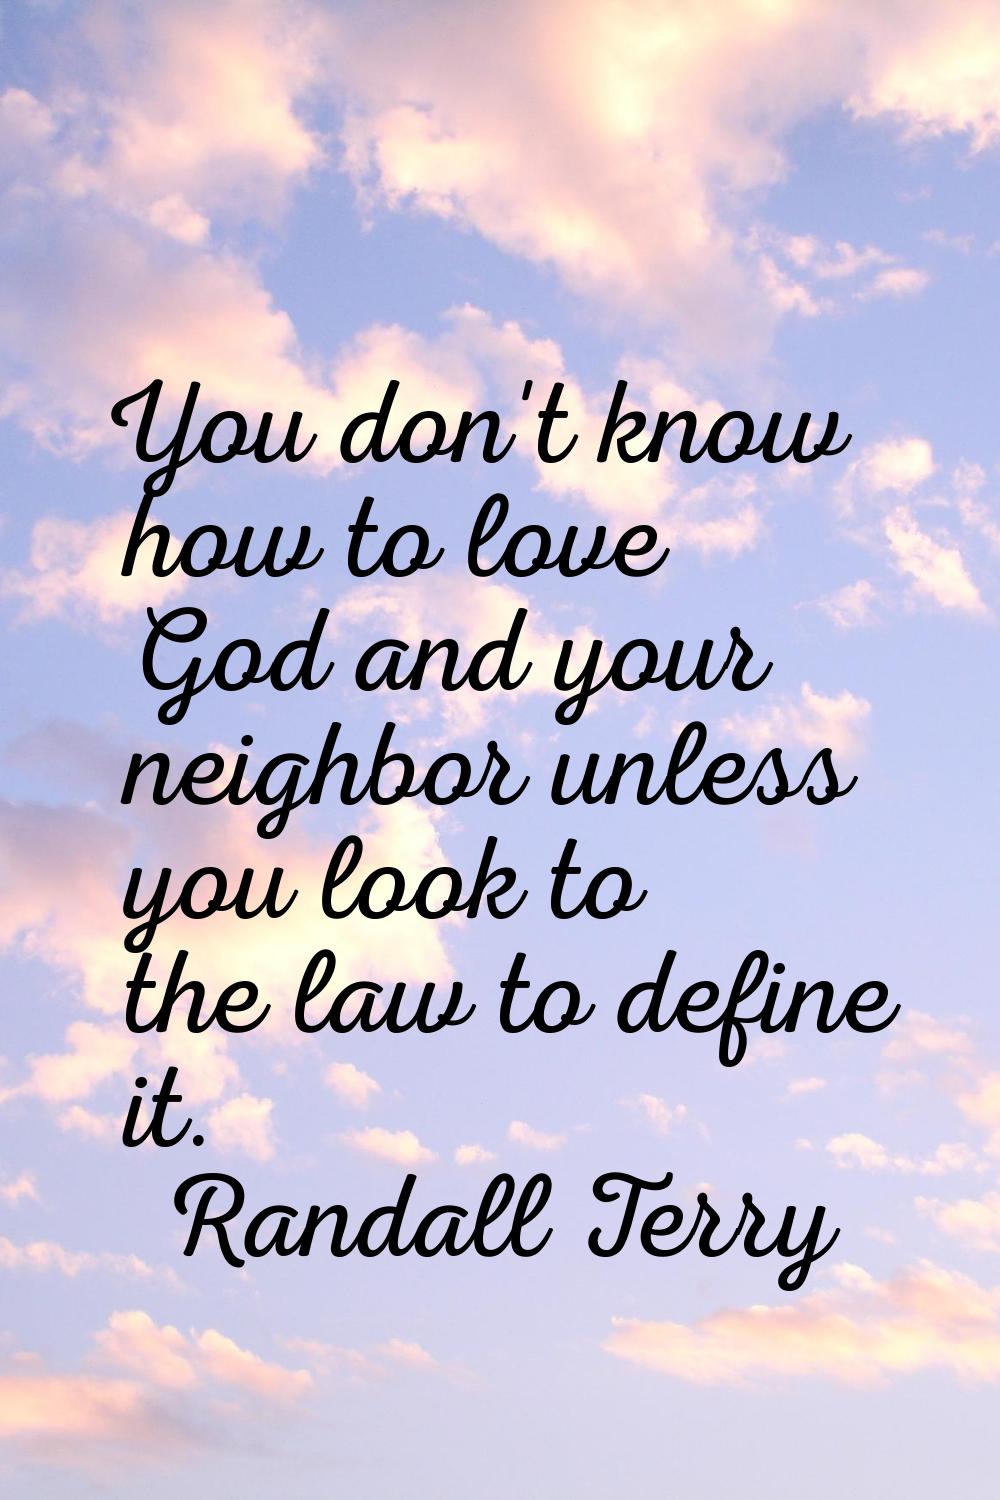 You don't know how to love God and your neighbor unless you look to the law to define it.